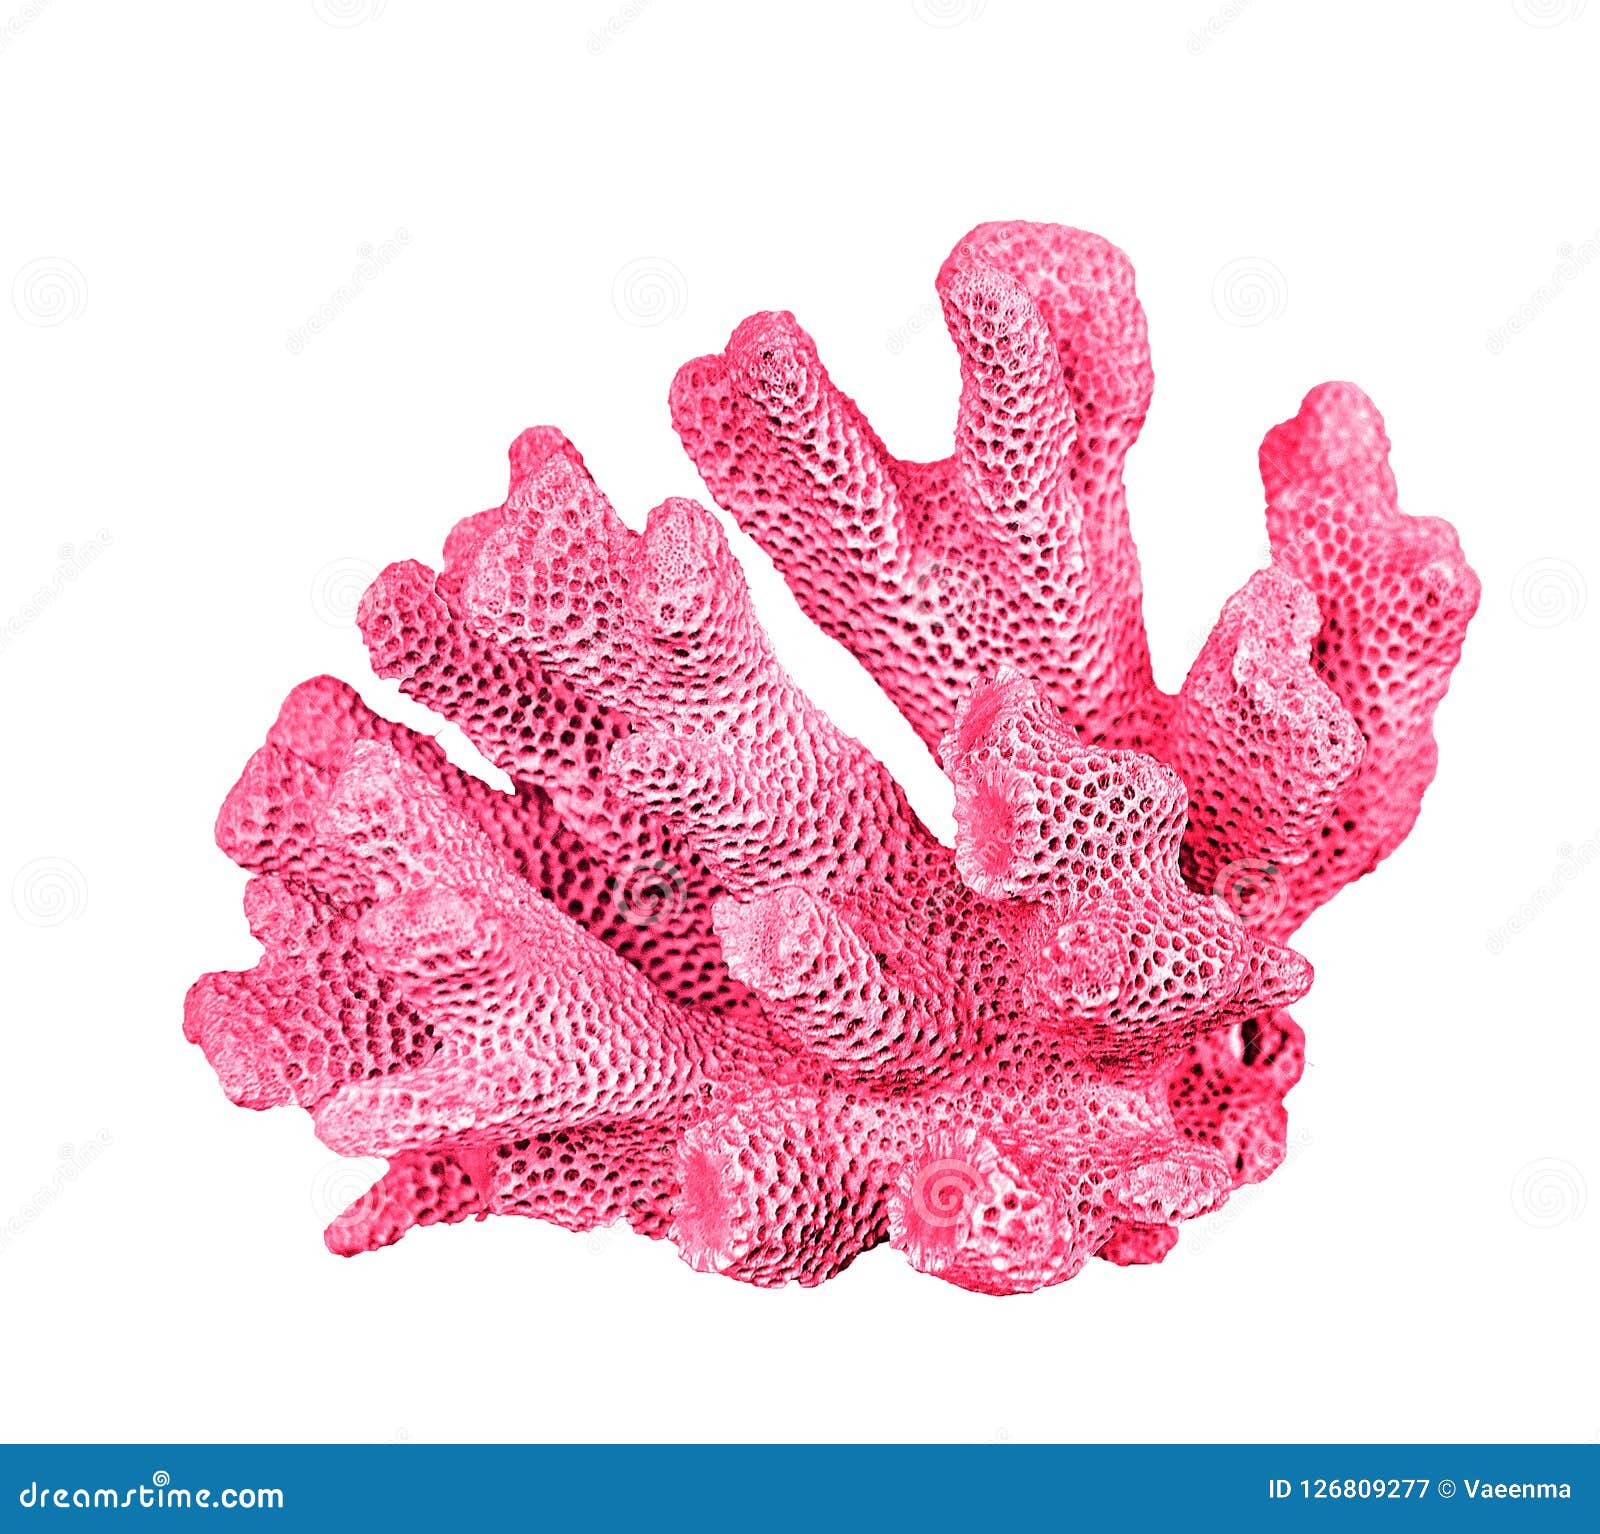 Coral Isolated on White Background Stock Image - Image of close ...